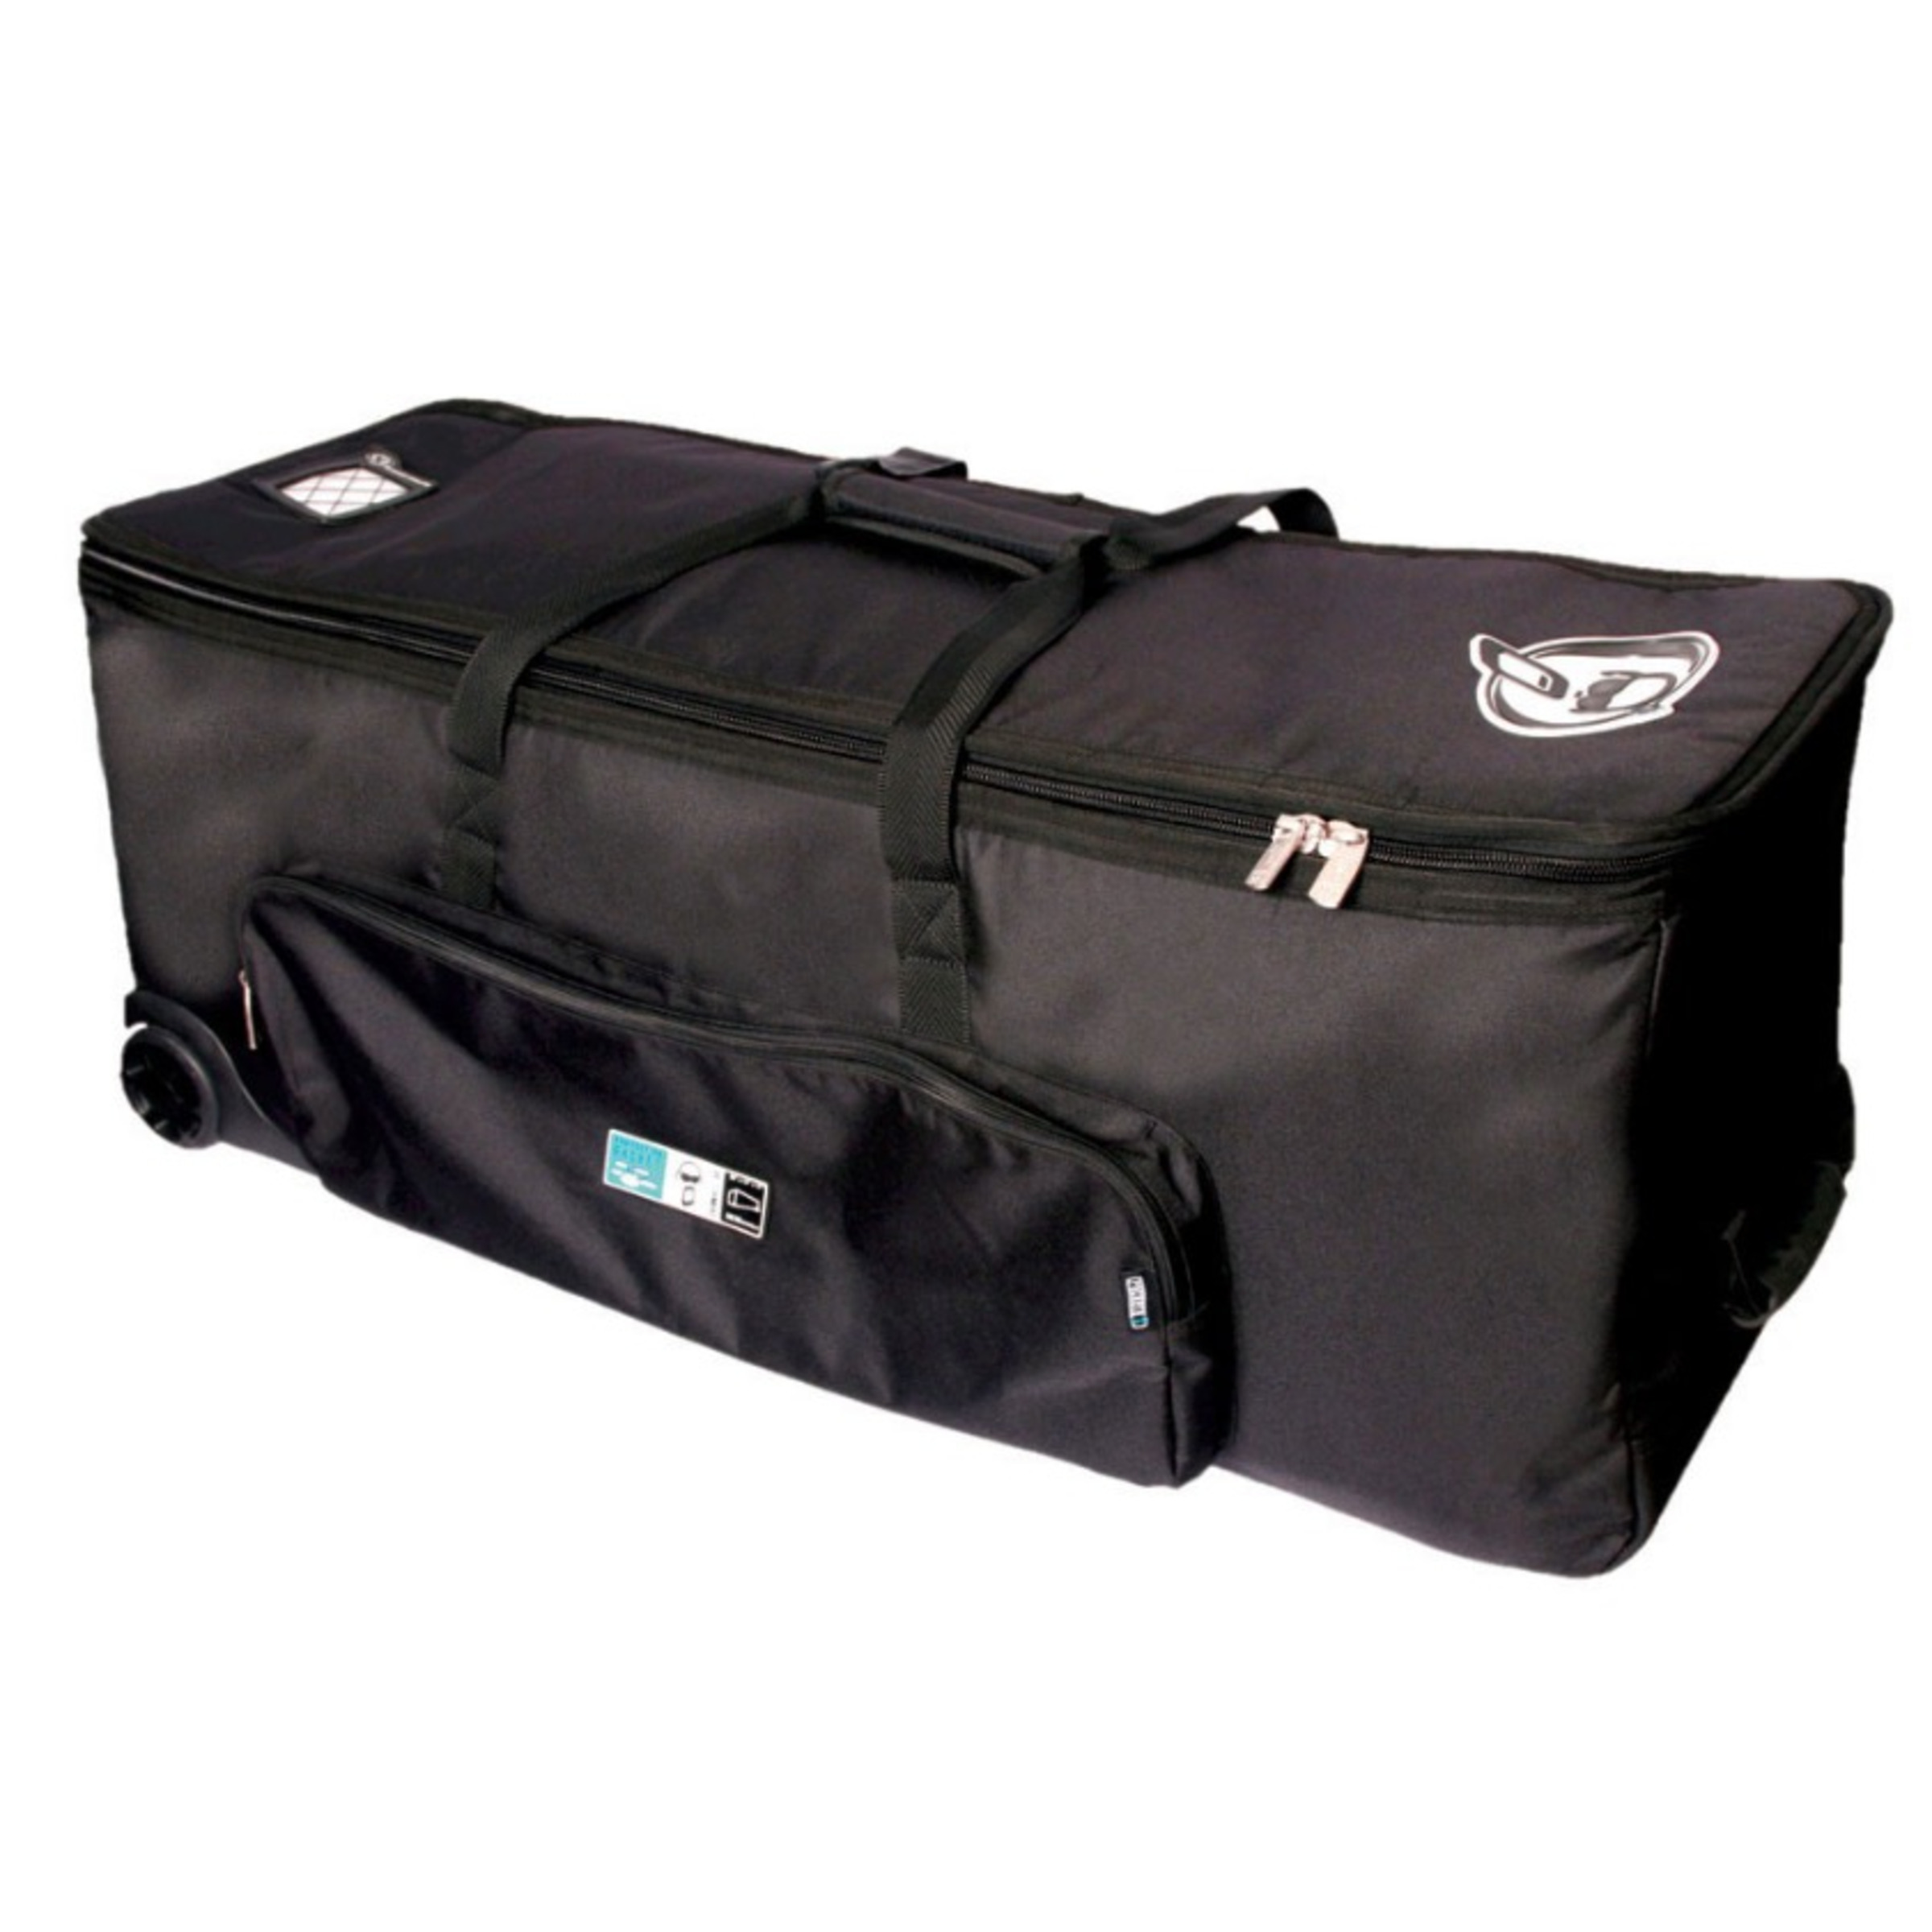 Protection Racket Drum Hardware Case +Wheels GigGear